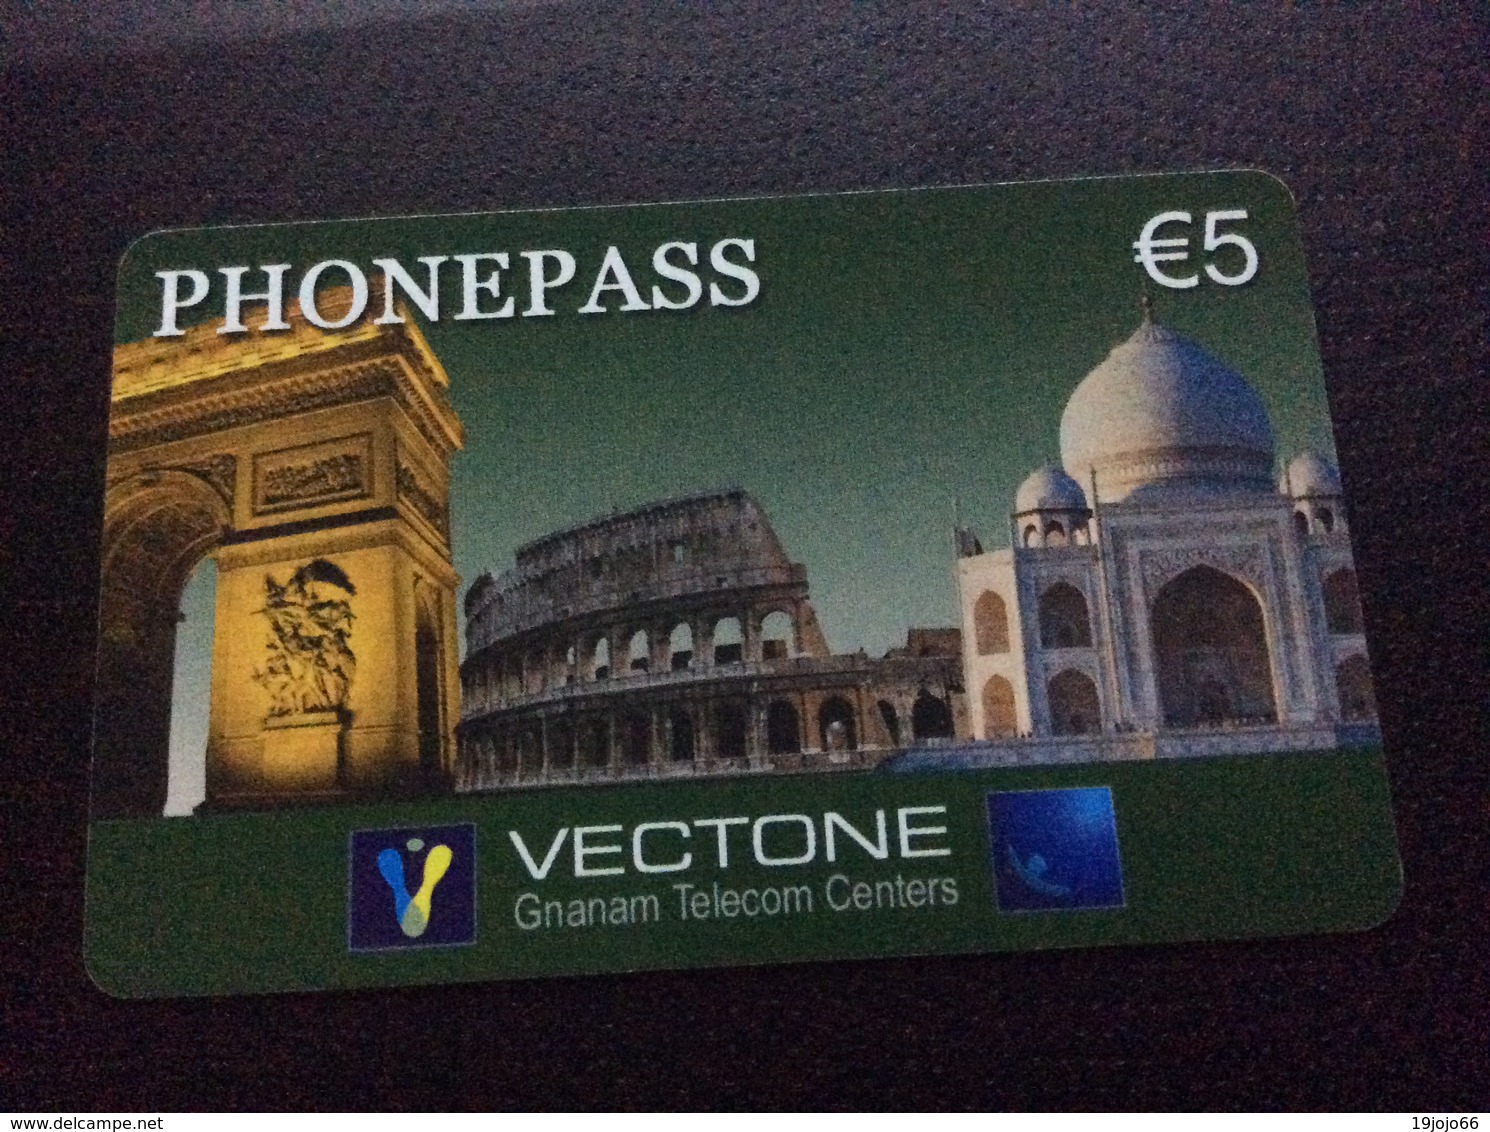 Vectone - Arc De Triumph, Moschee   - 5 Euro -   Little Printed  -   Used Condition - [2] Mobile Phones, Refills And Prepaid Cards